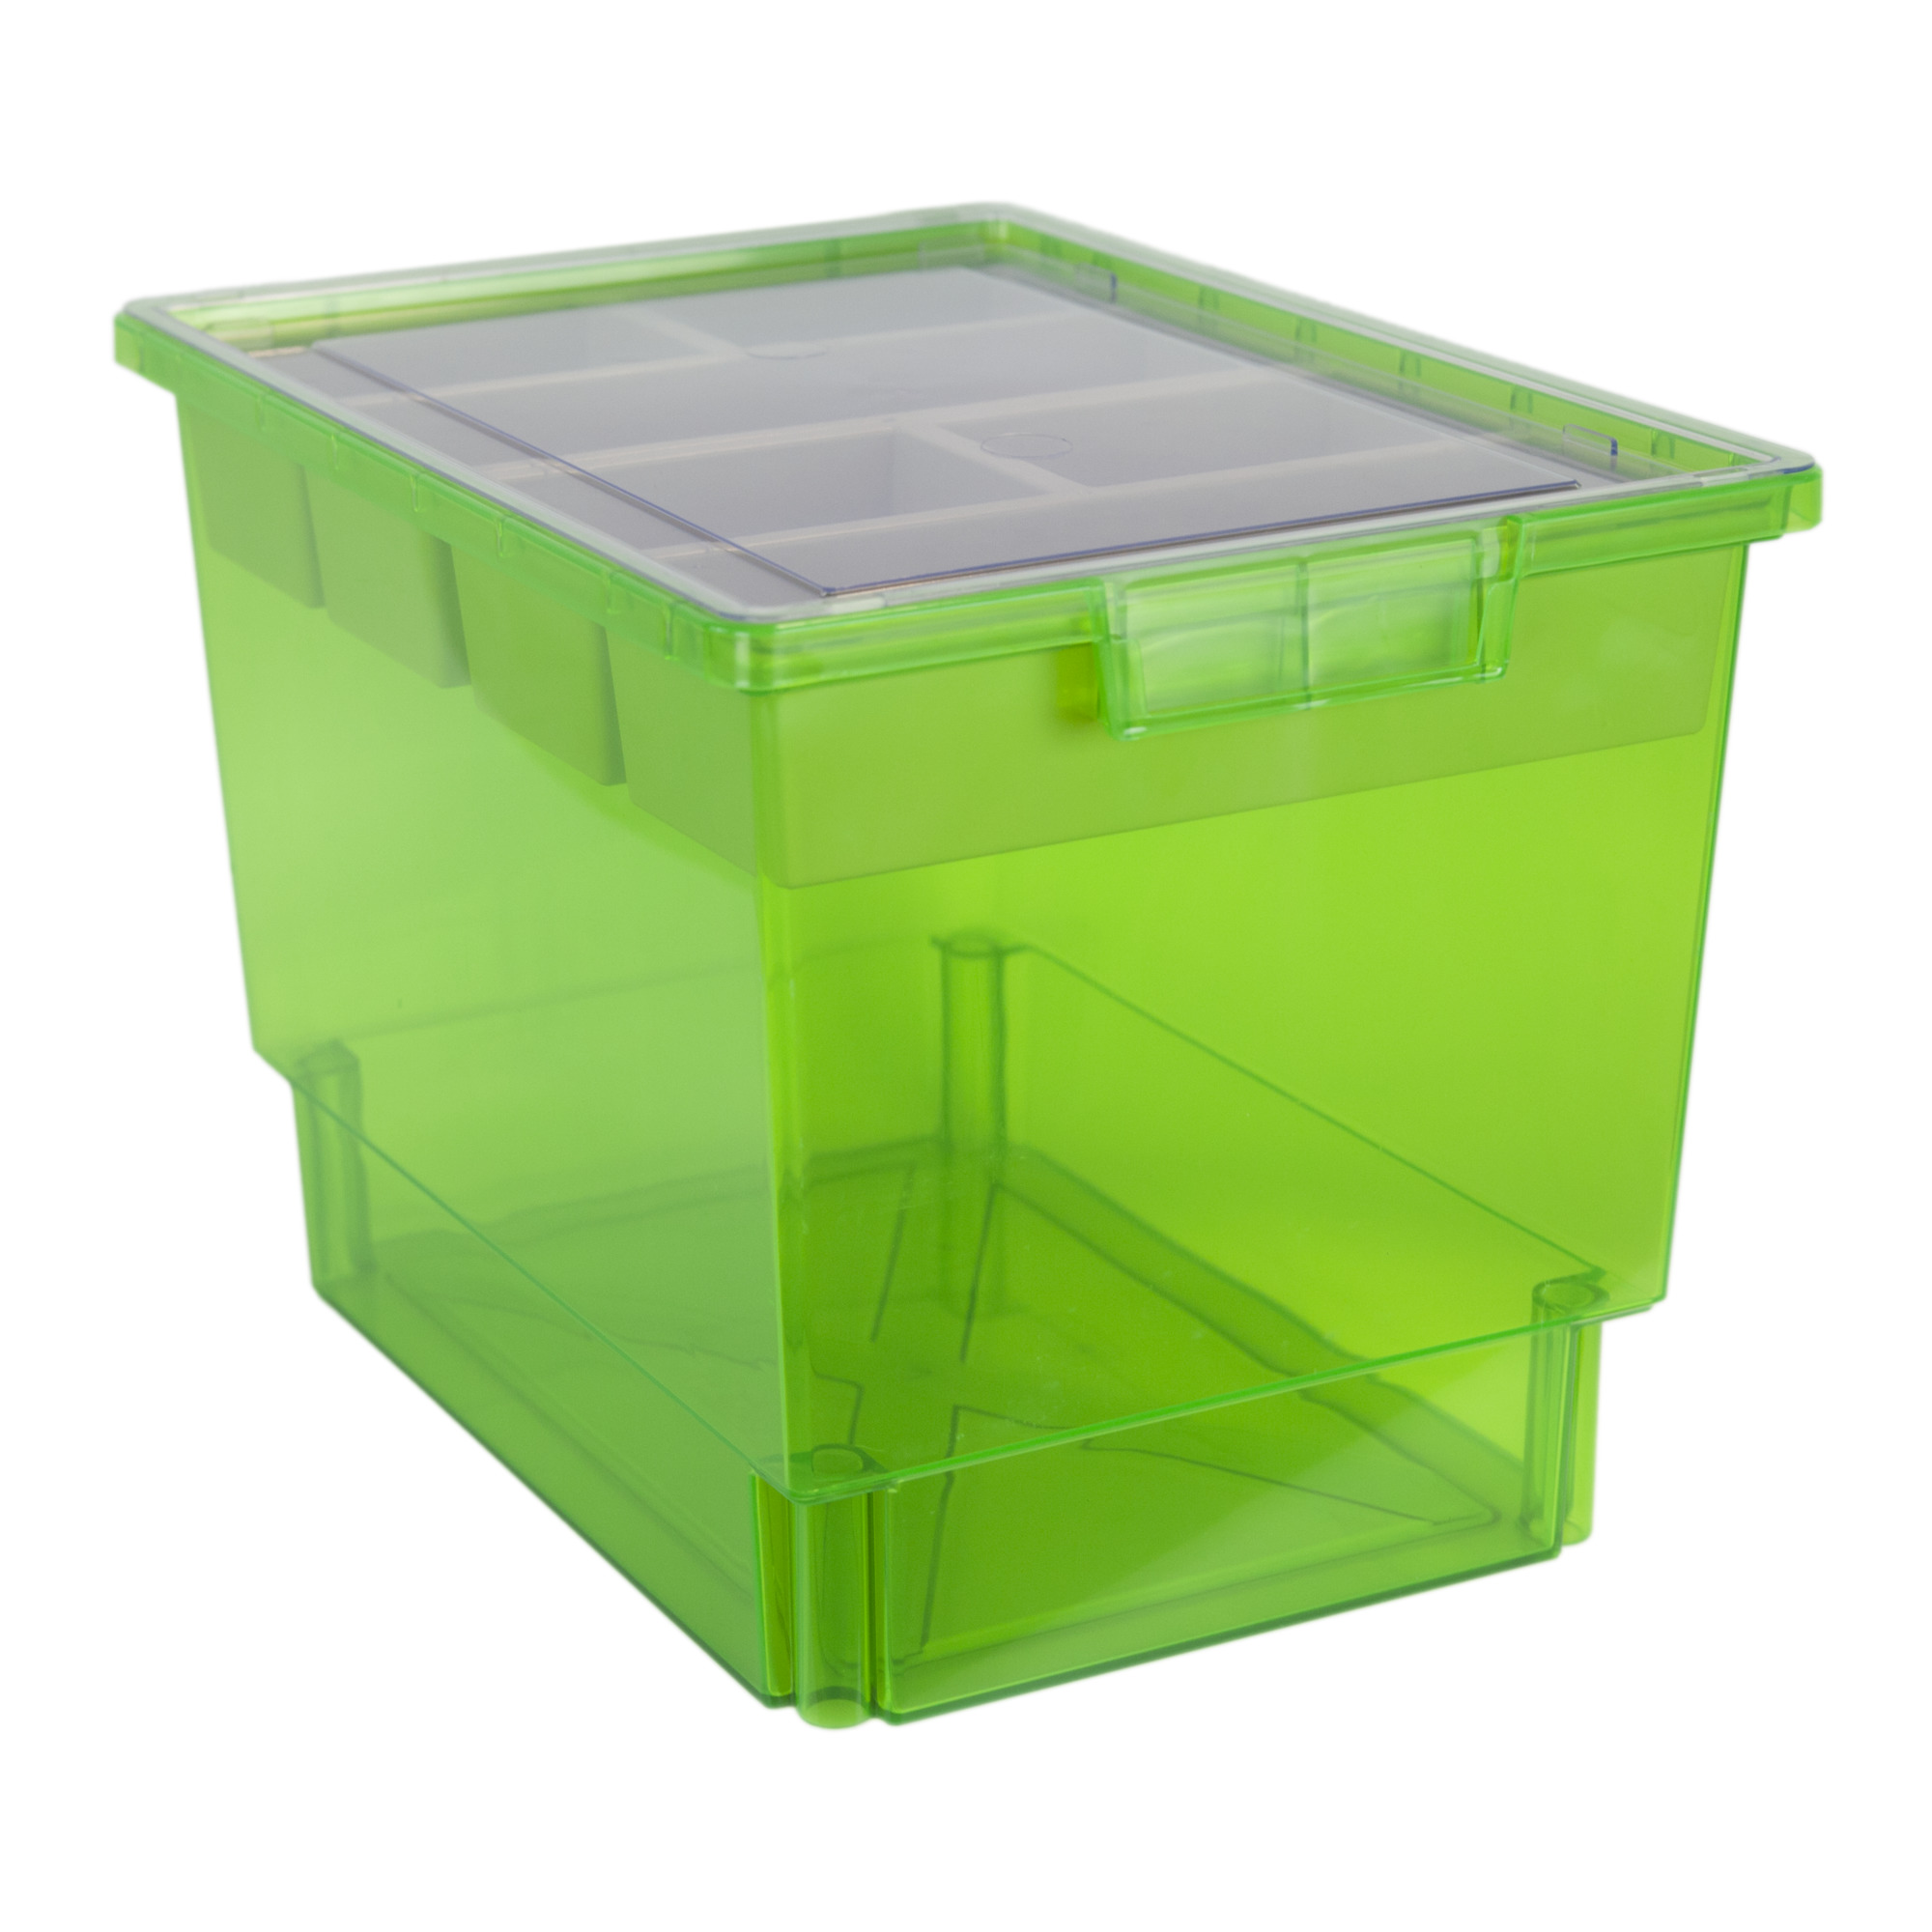 Certwood StorWerks, Slim Line 12Inch Tray Kit (3 x Divisions) Neon Green, Included (qty.) 1, Material Plastic, Height 9 in, Model CE1954FG-NK0202-1